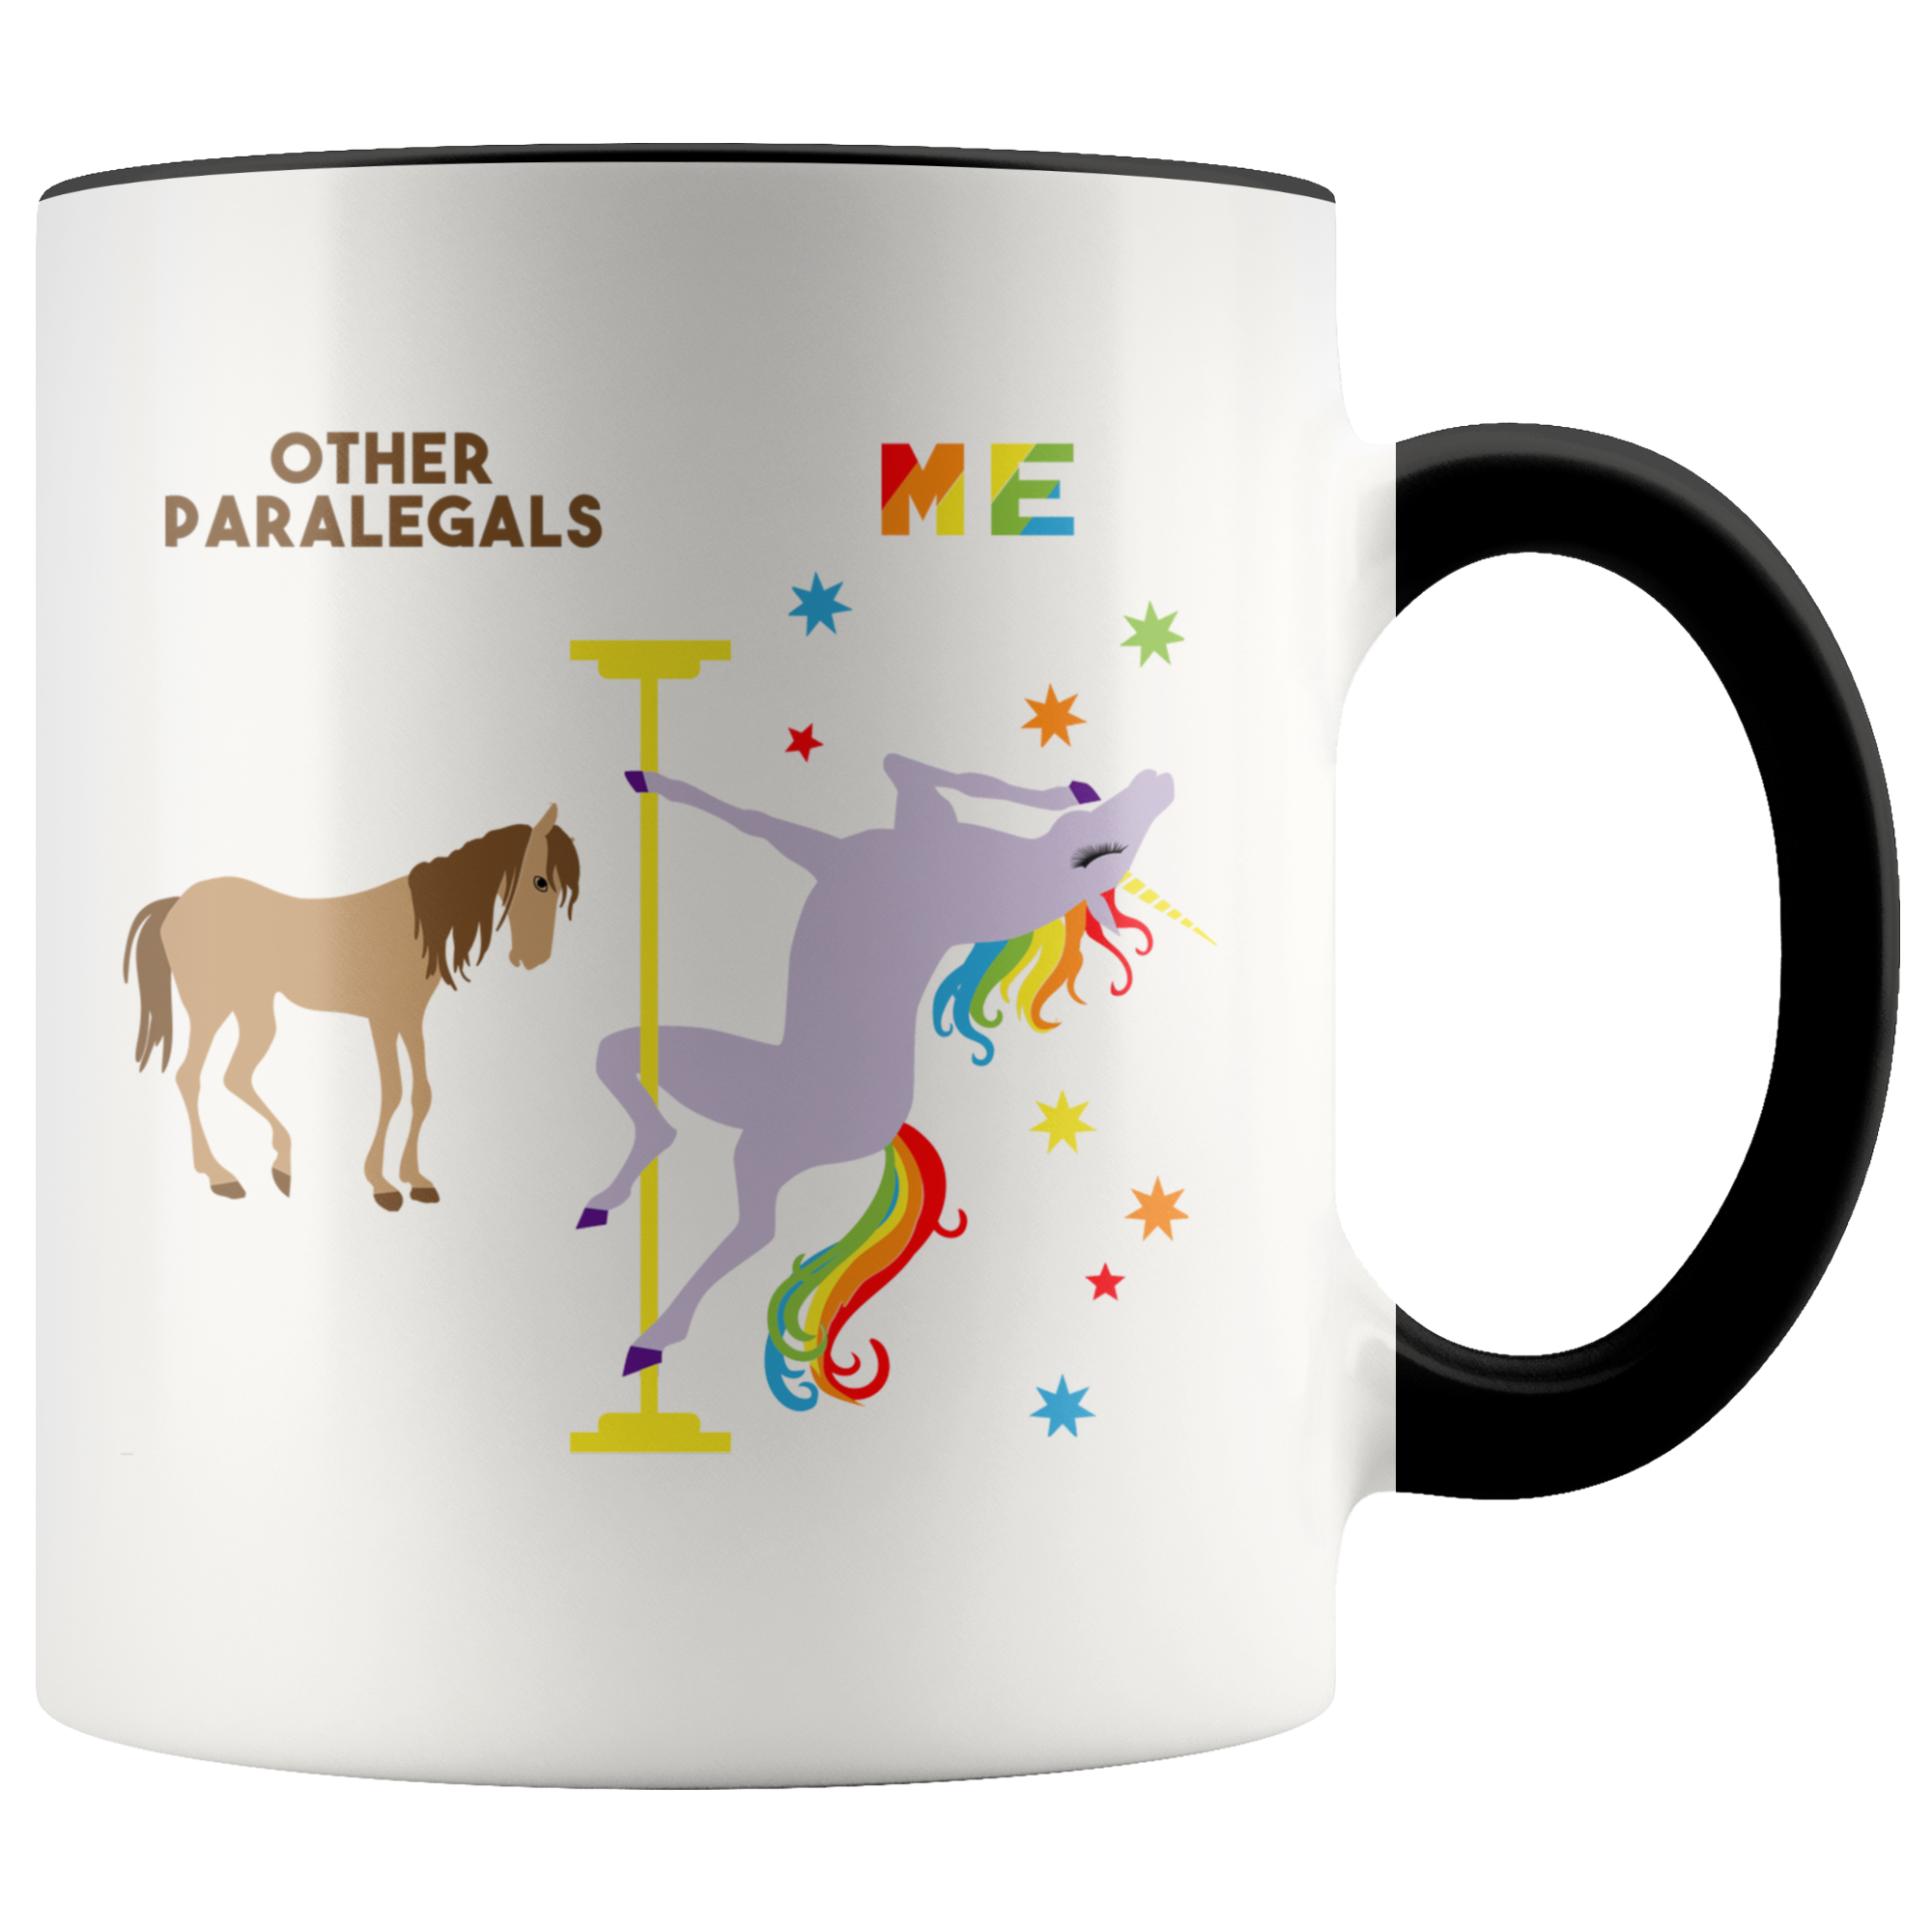 Paralegal Mug Funny Paralegal Gift Paralegal Thank You Graduation Birthday Gift Coffee Cup Pole Dancing Unicorn